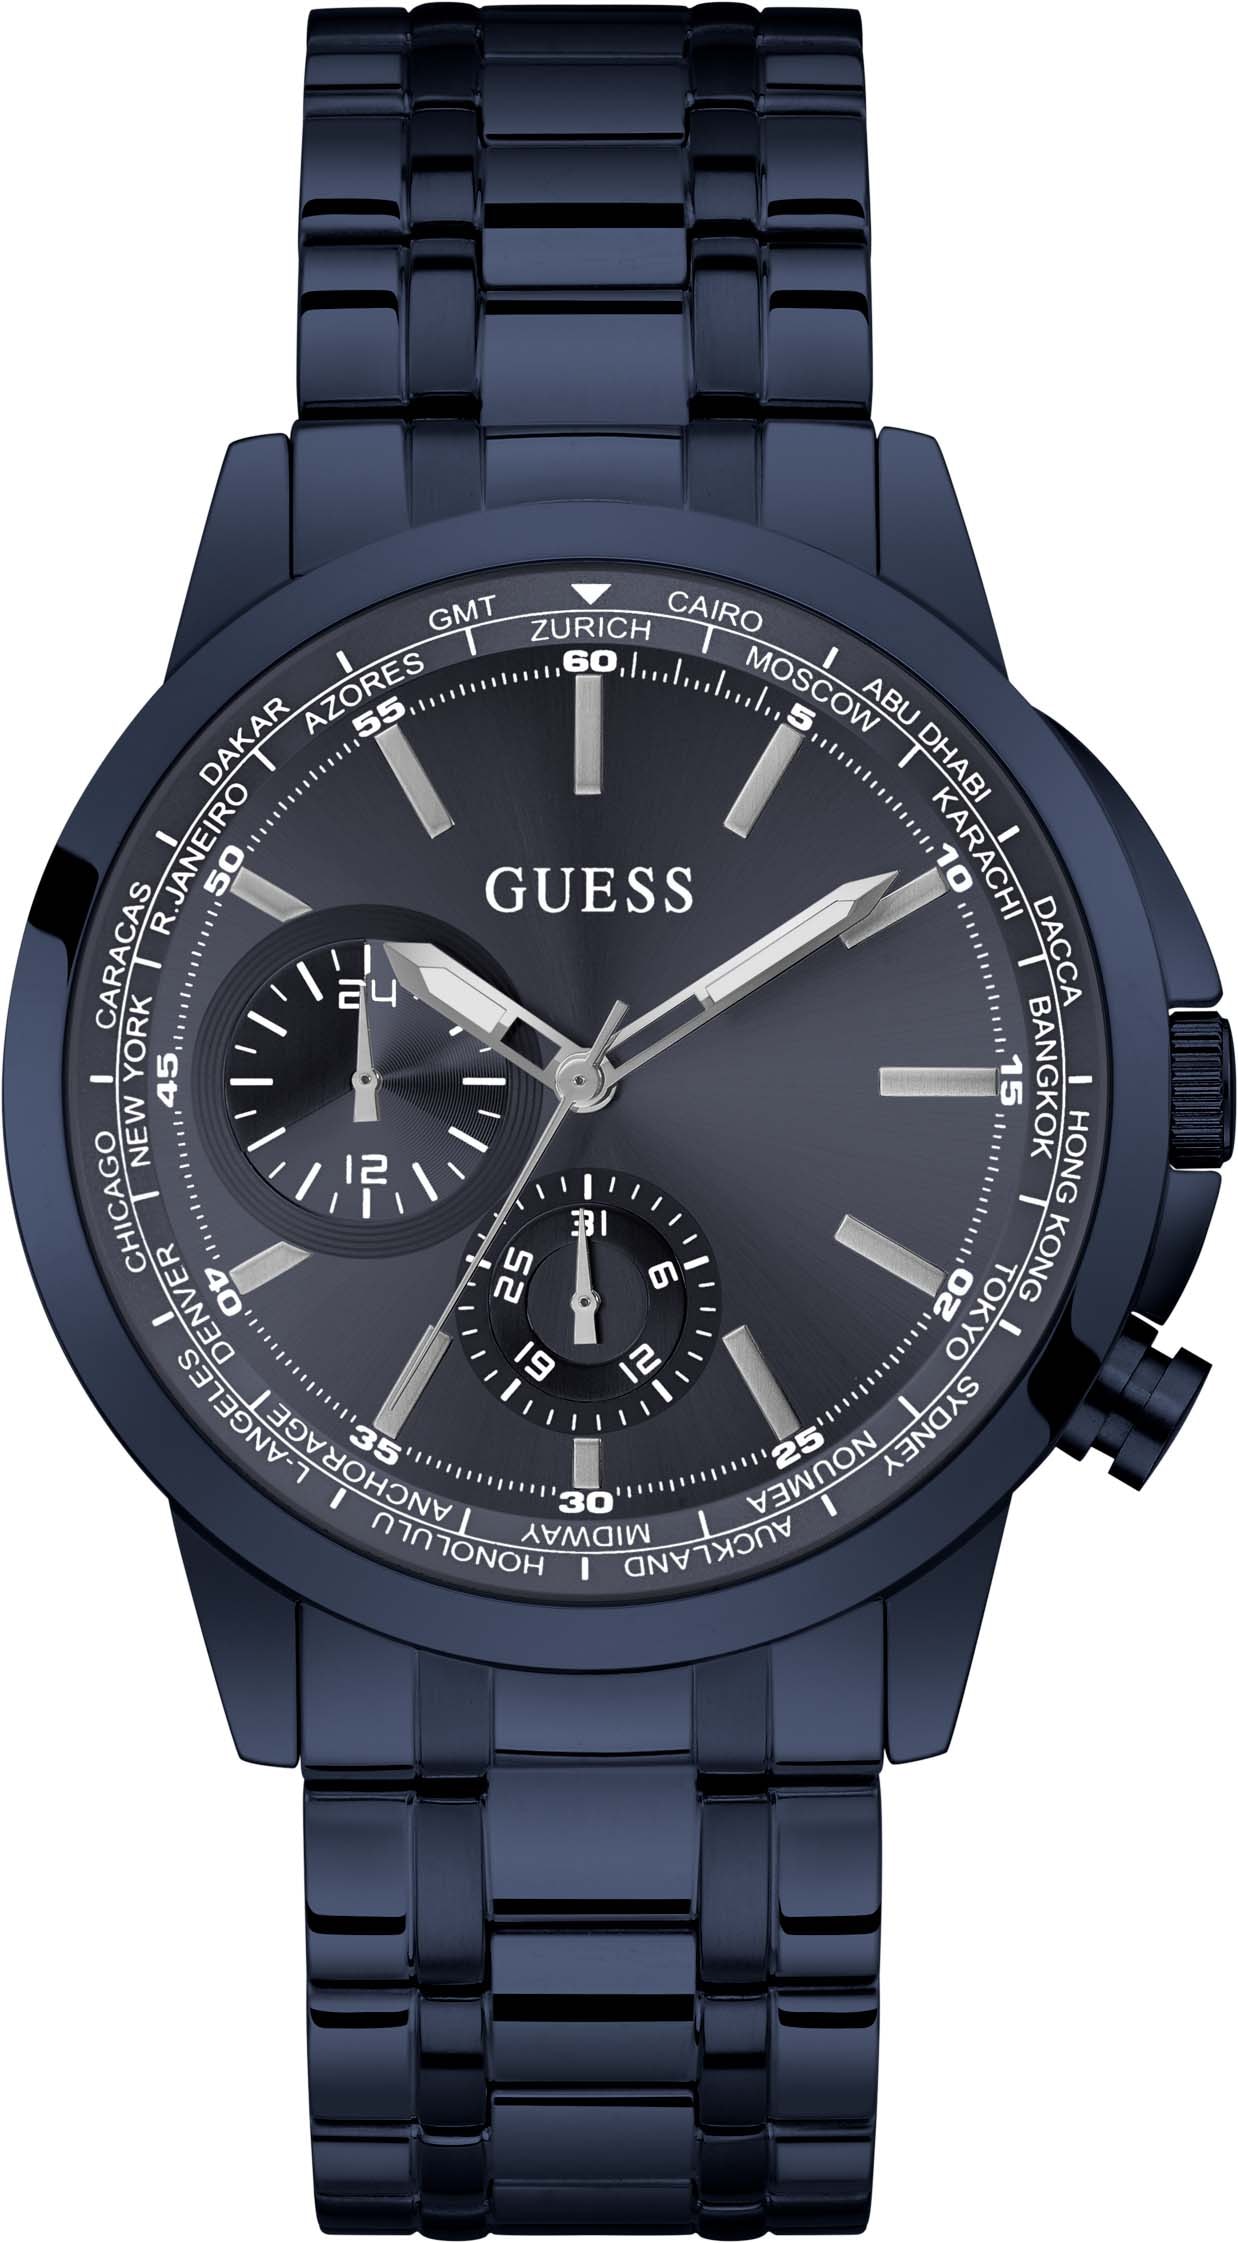 Multifunktionsuhr Guess »GW0490G4«